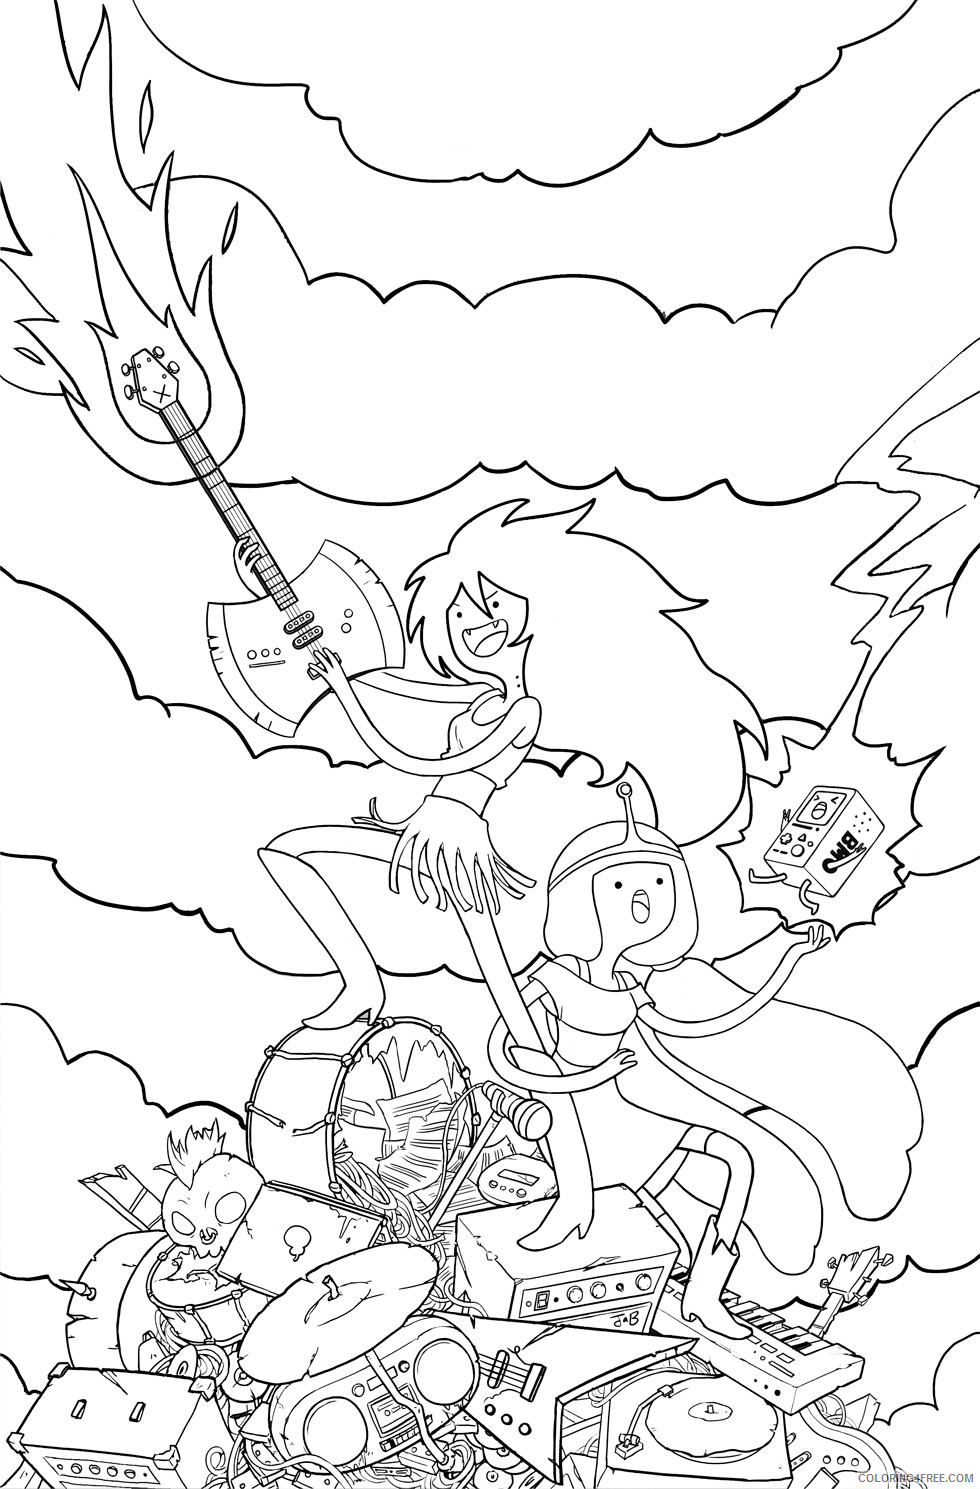 Adventure Time Coloring Pages Cartoons Free Adventure Time Printable 2020 0268 Coloring4free